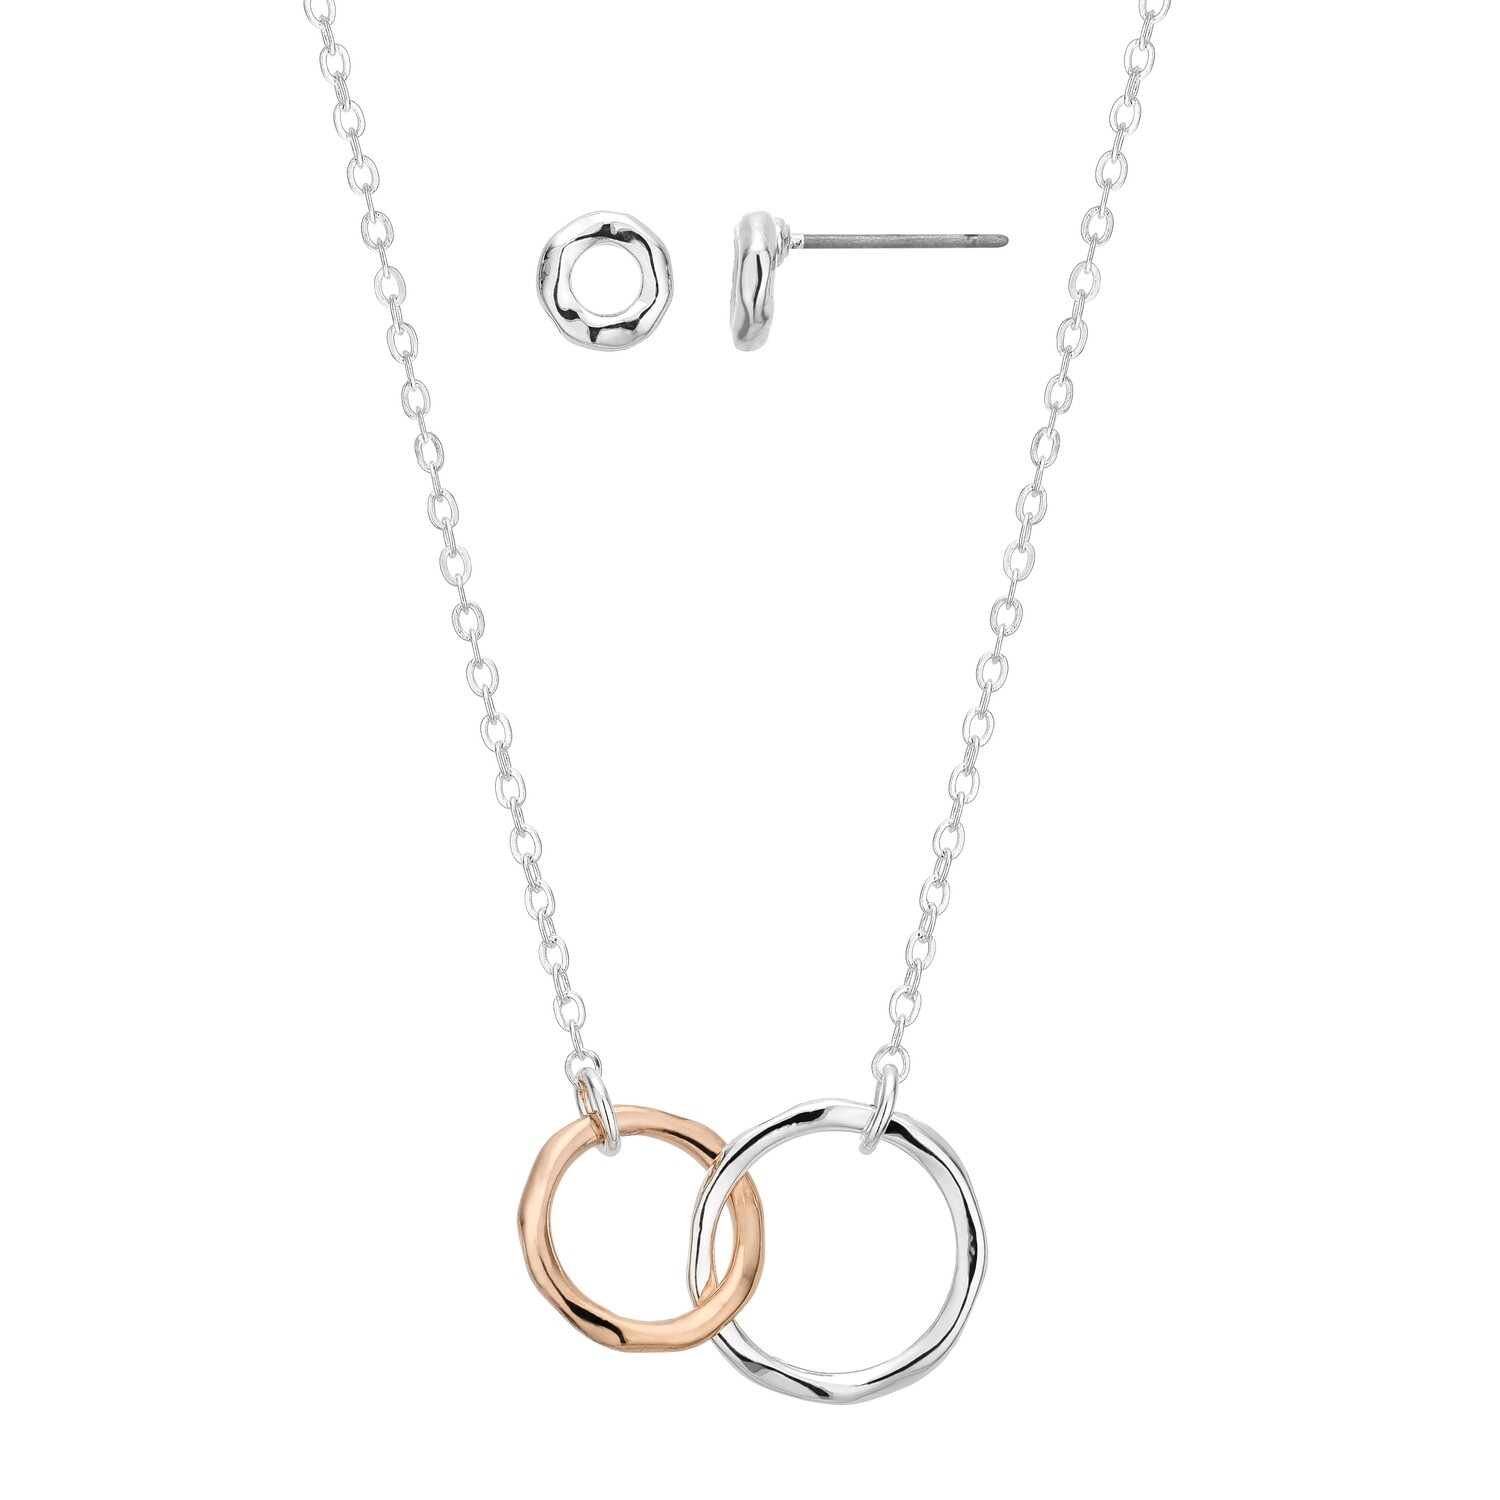 Buckley London® Entwined Rings Earrings and Pendant Set